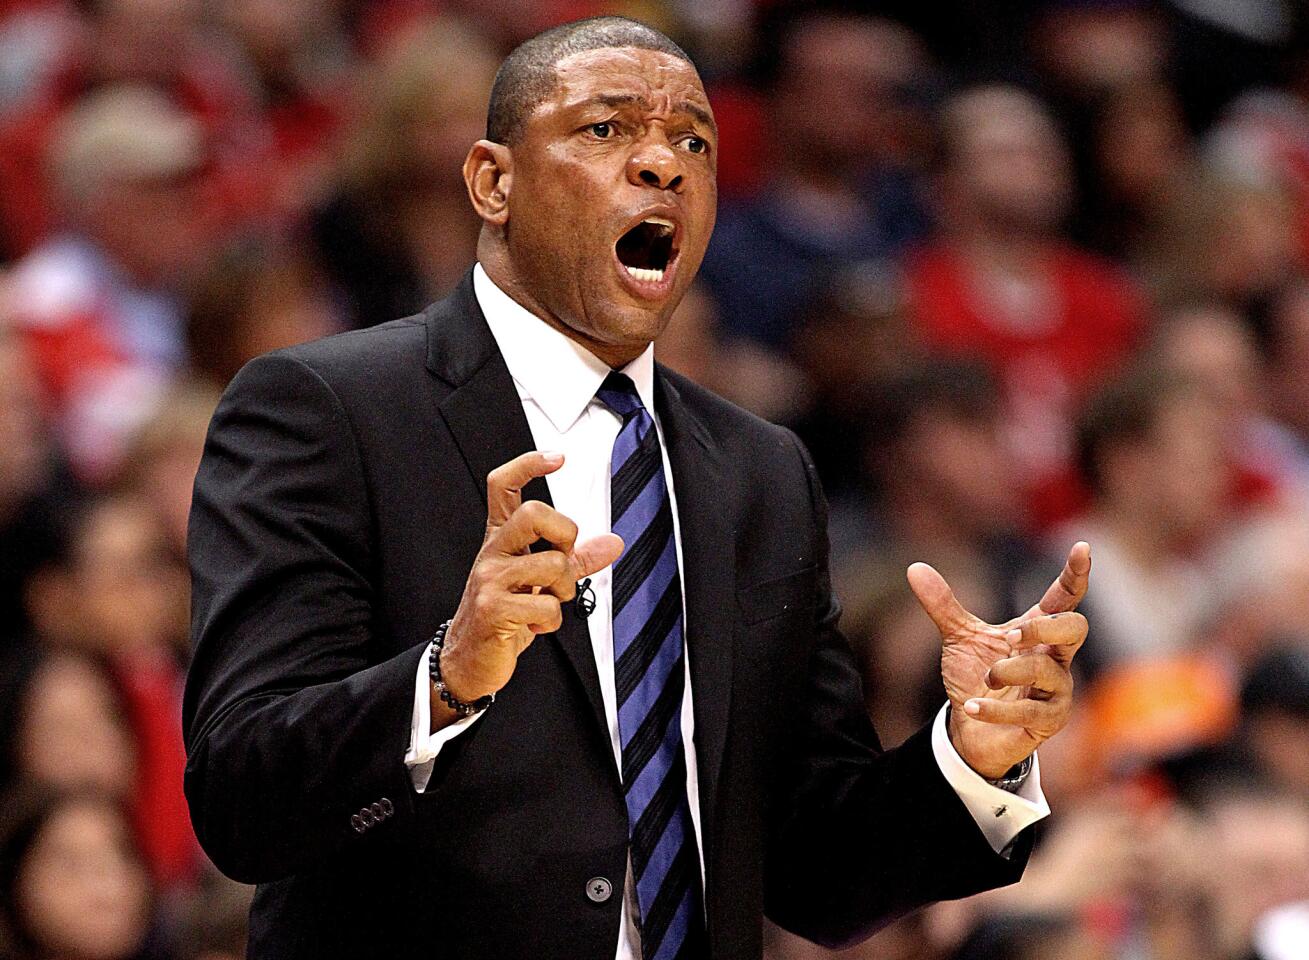 Clippers Coach Doc Rivers directs his team against the Warriors last October at Staples Center. In his first year with L.A., Rivers has the Pacific Division champs seemingly poised for a deep run in the NBA playoffs.